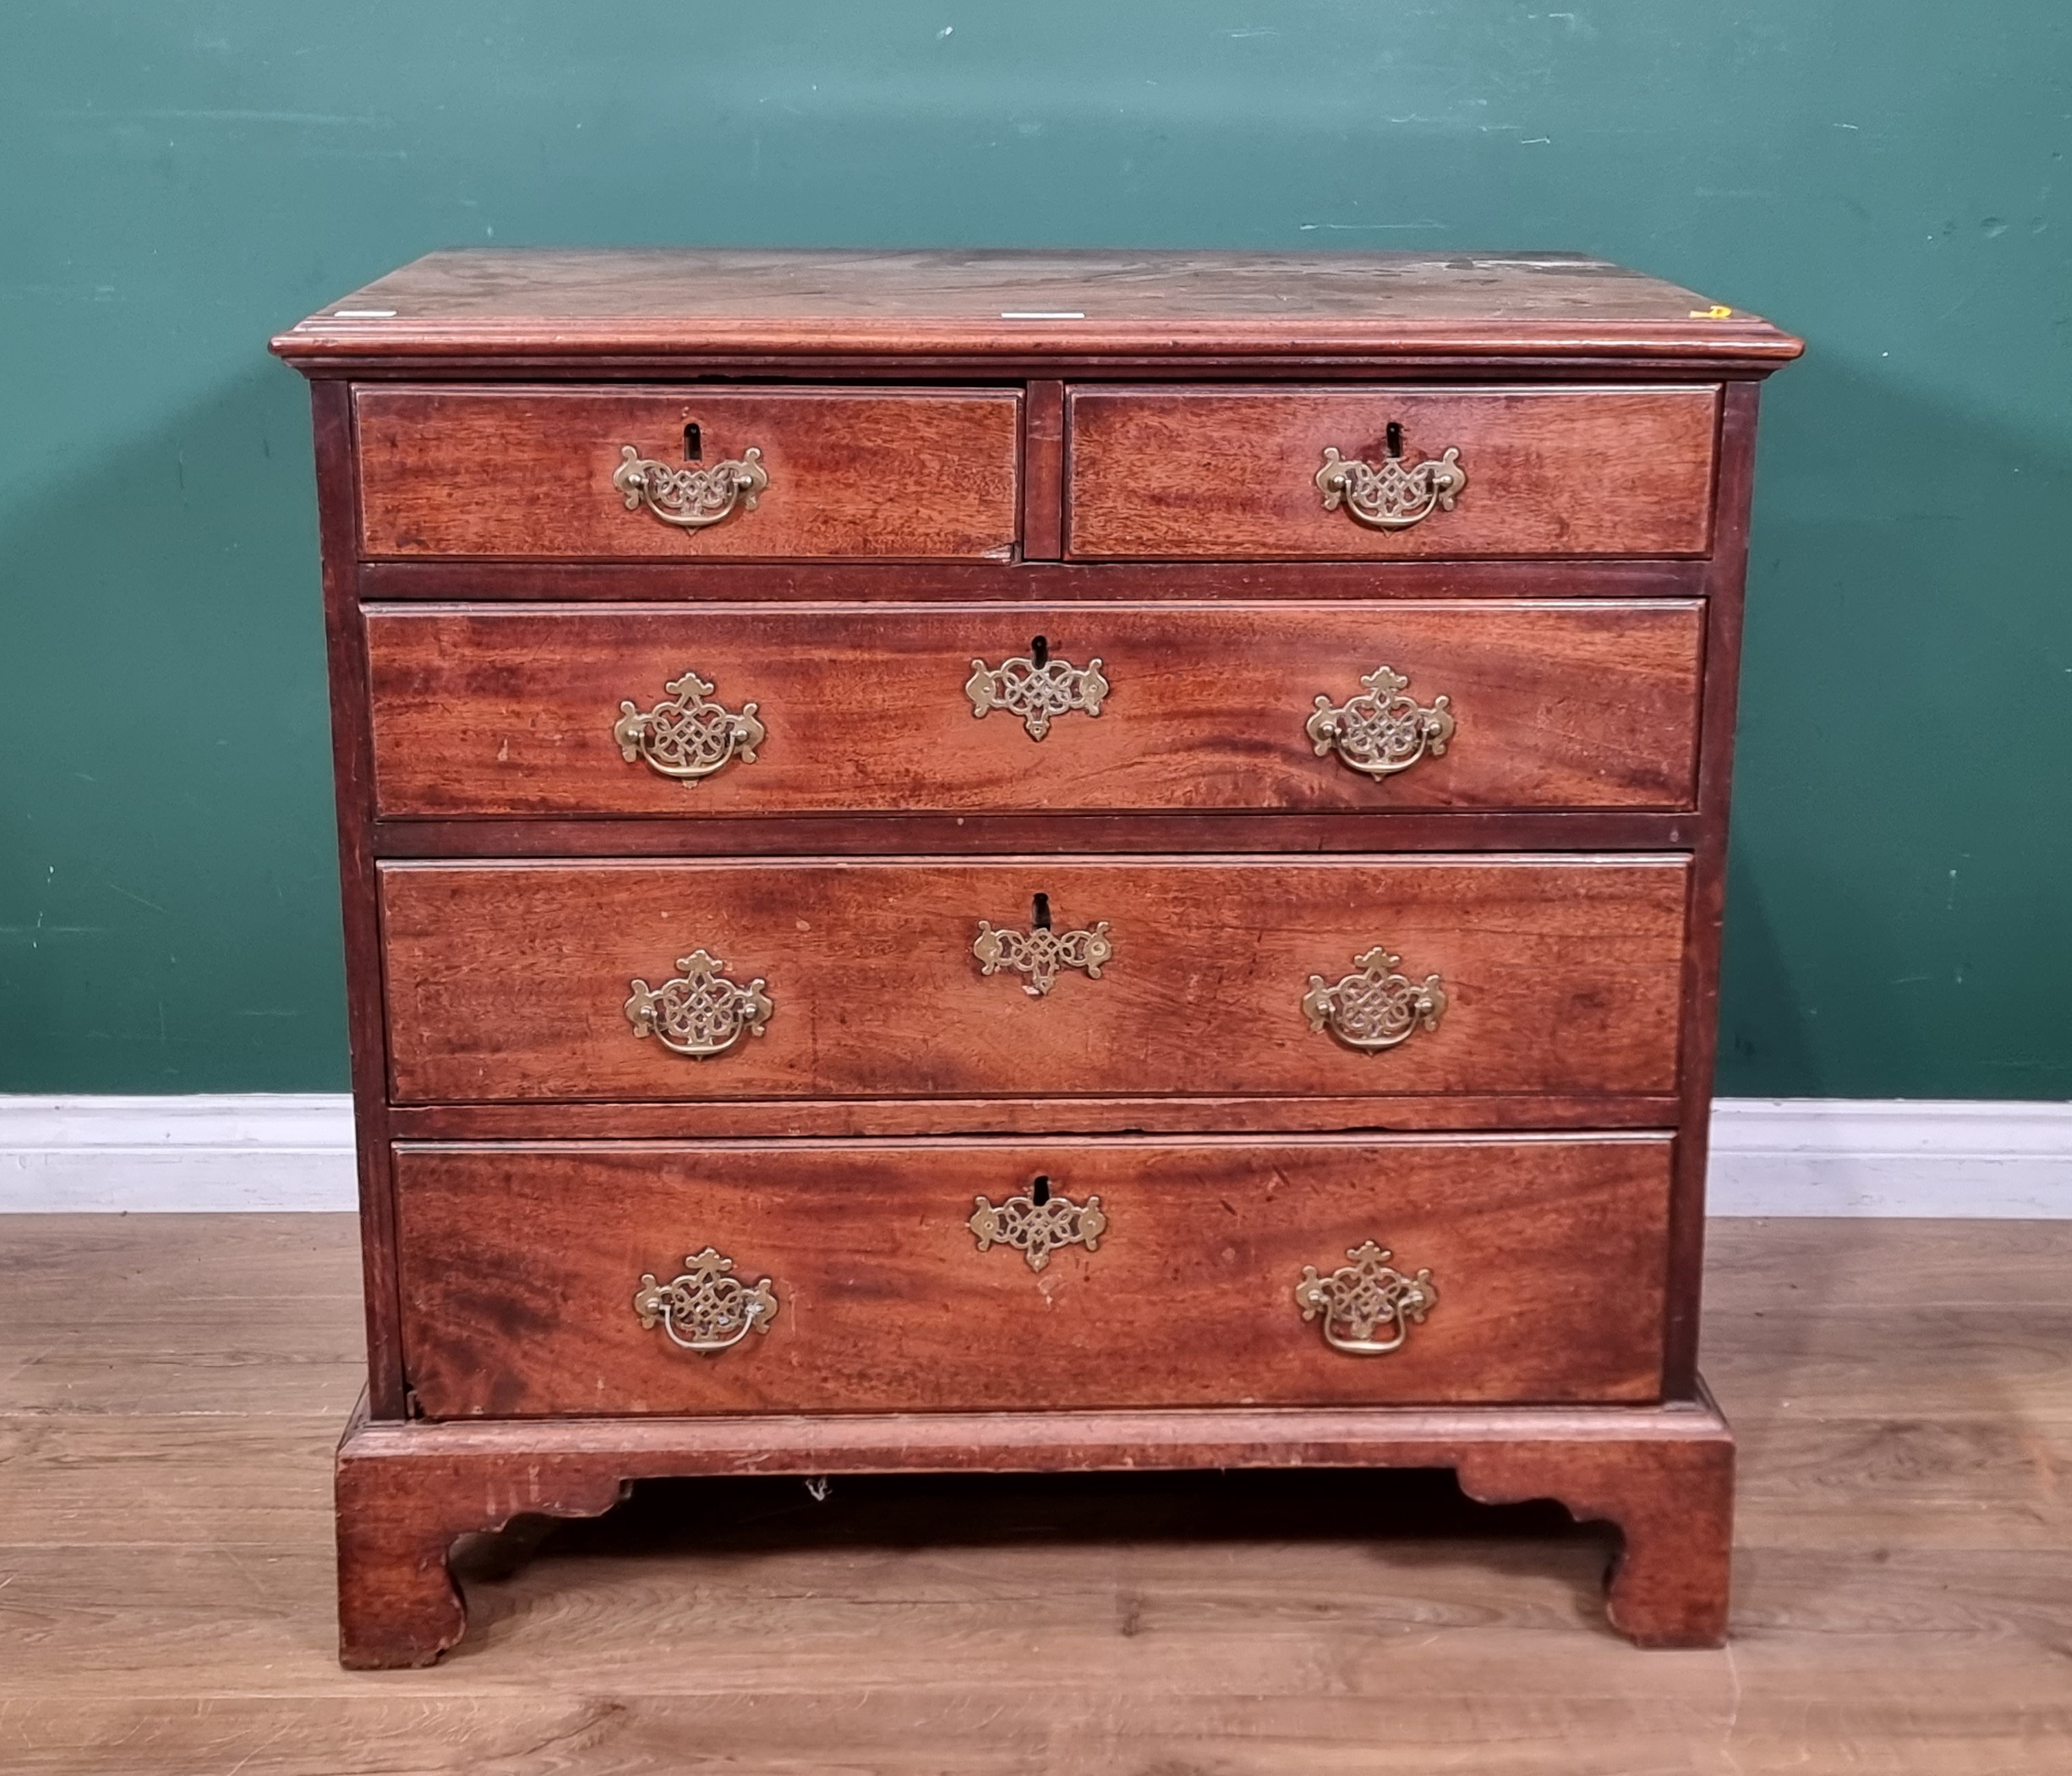 A George III mahogany Chest of two short and three long drawers on bracket feet, 2ft 9in wide